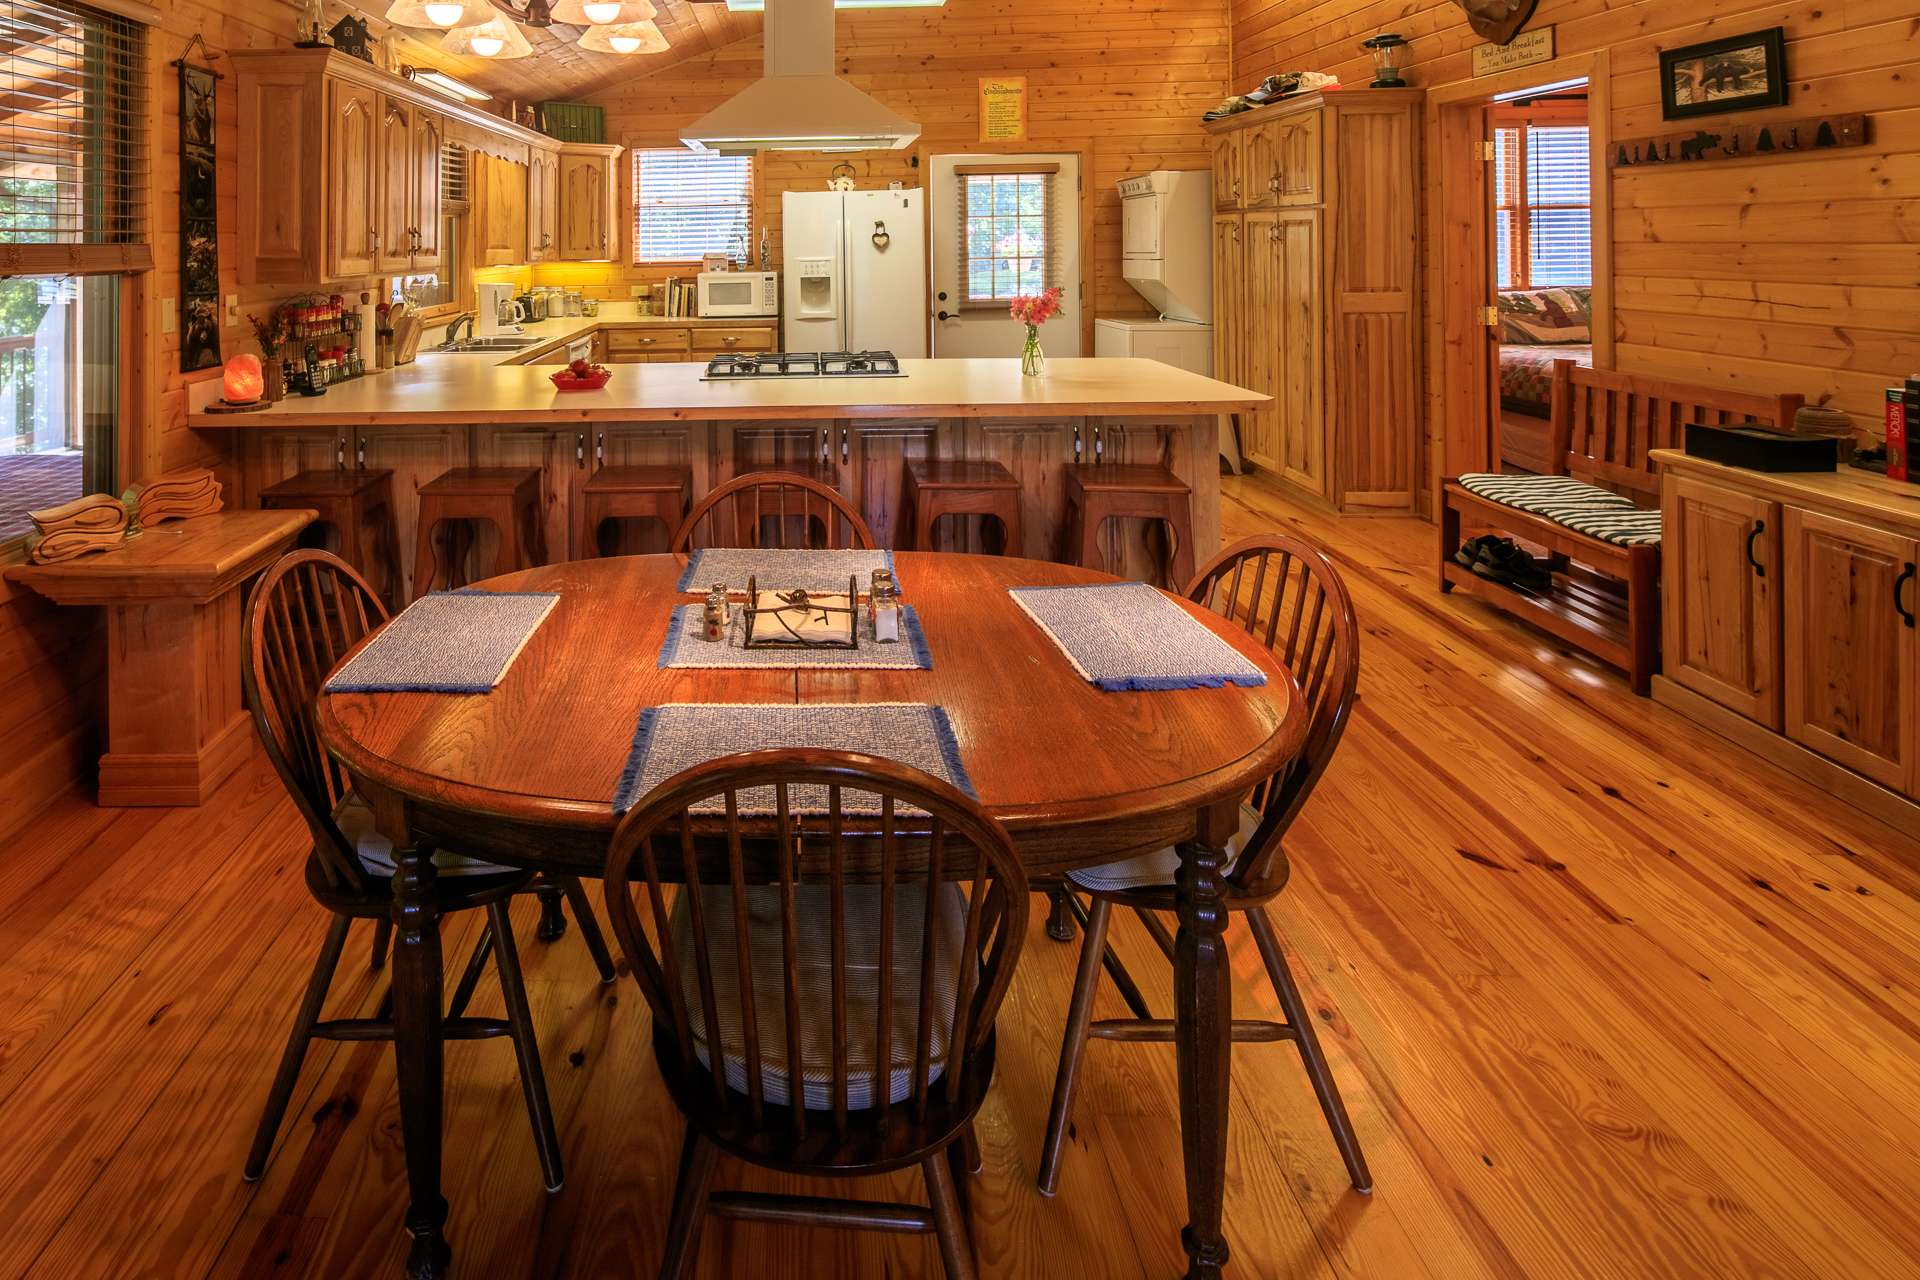 Notice the wood floors that run throughout the cabin.